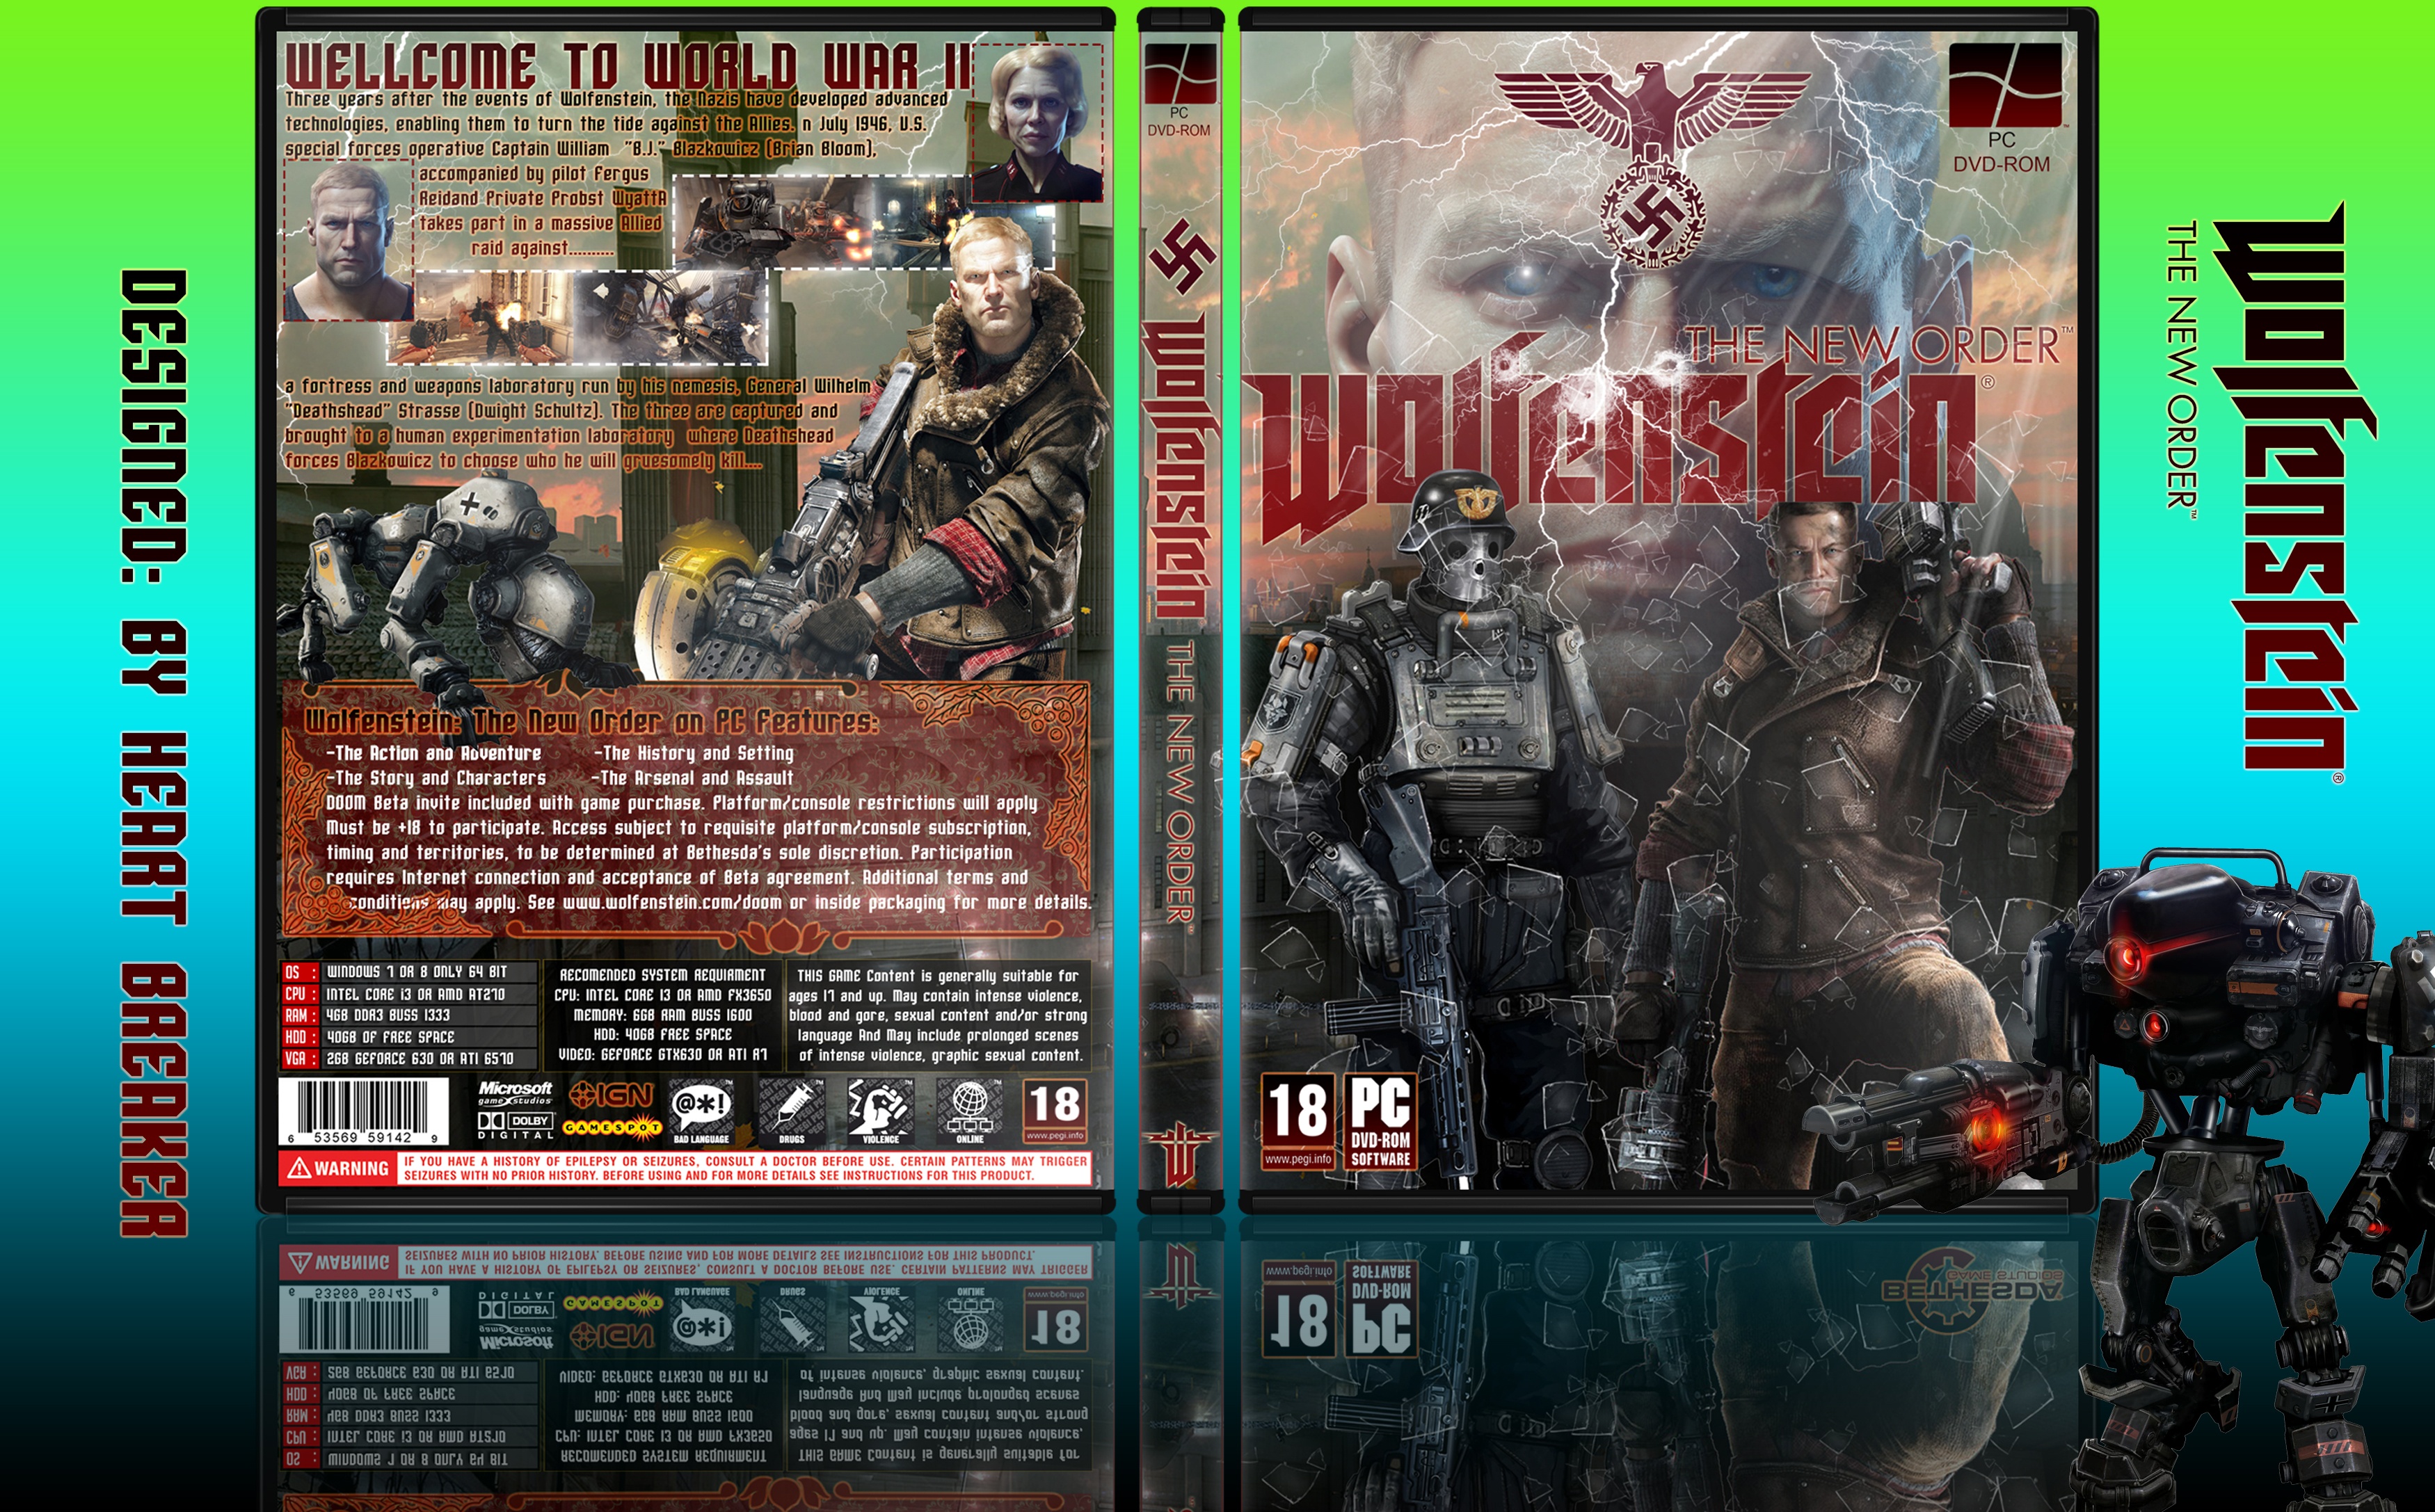 Wolfenstein: The New Order box cover